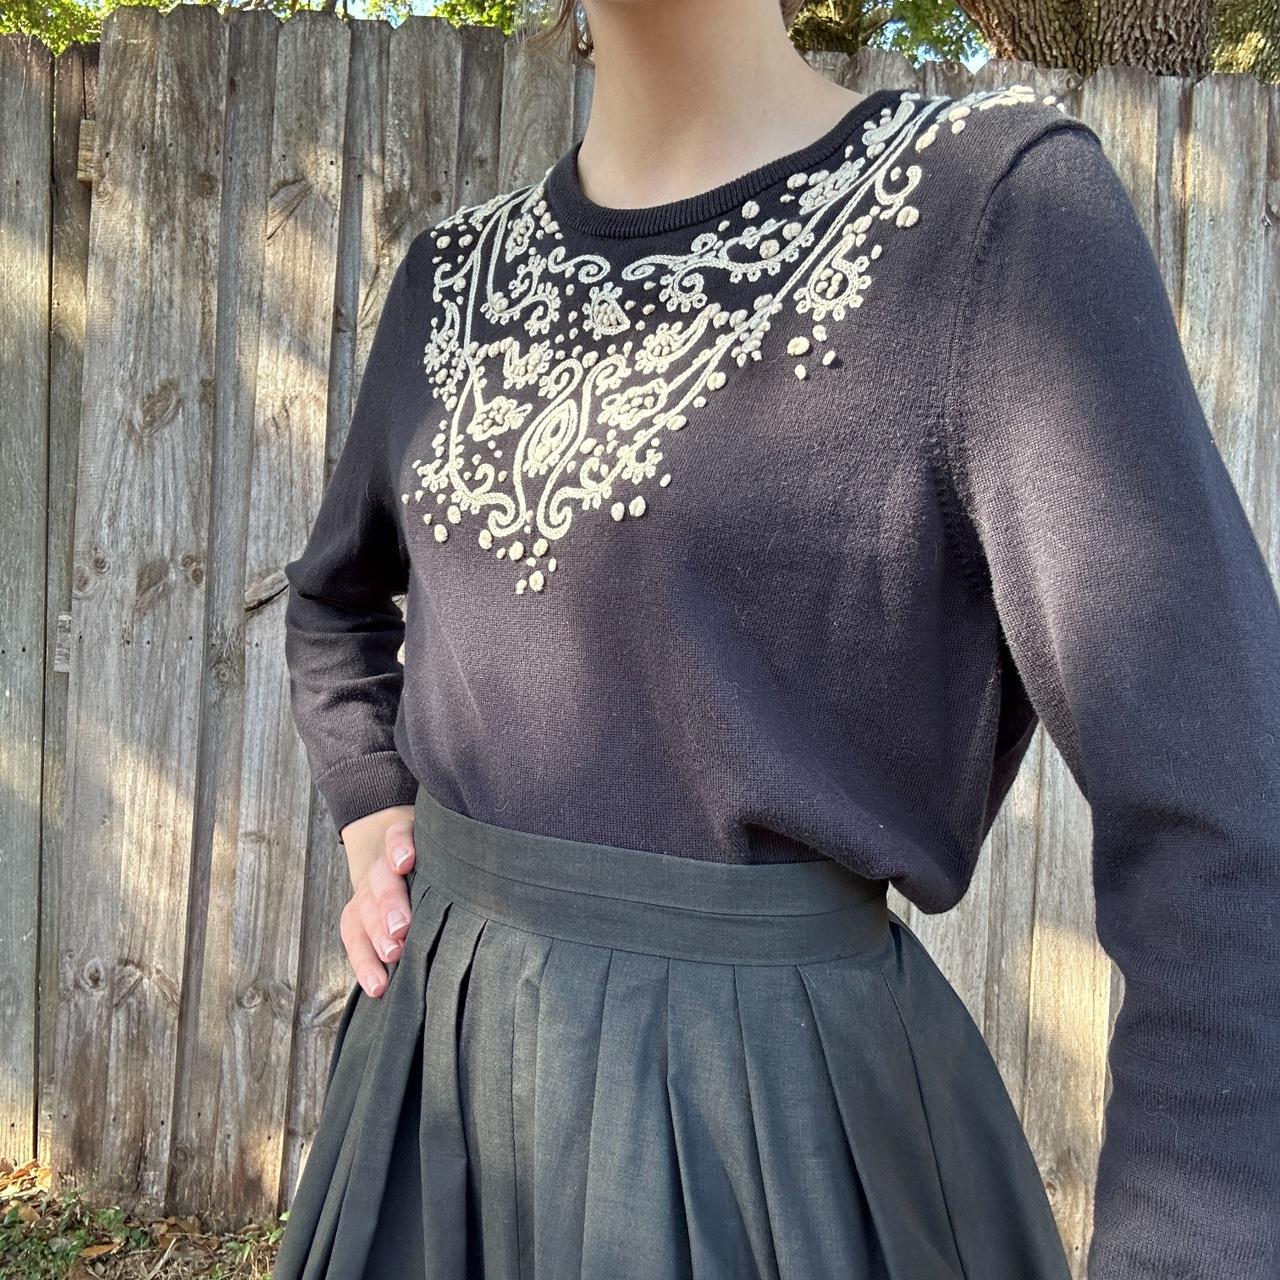 Black cropped sleeved sweater with embroidery I'm - Depop